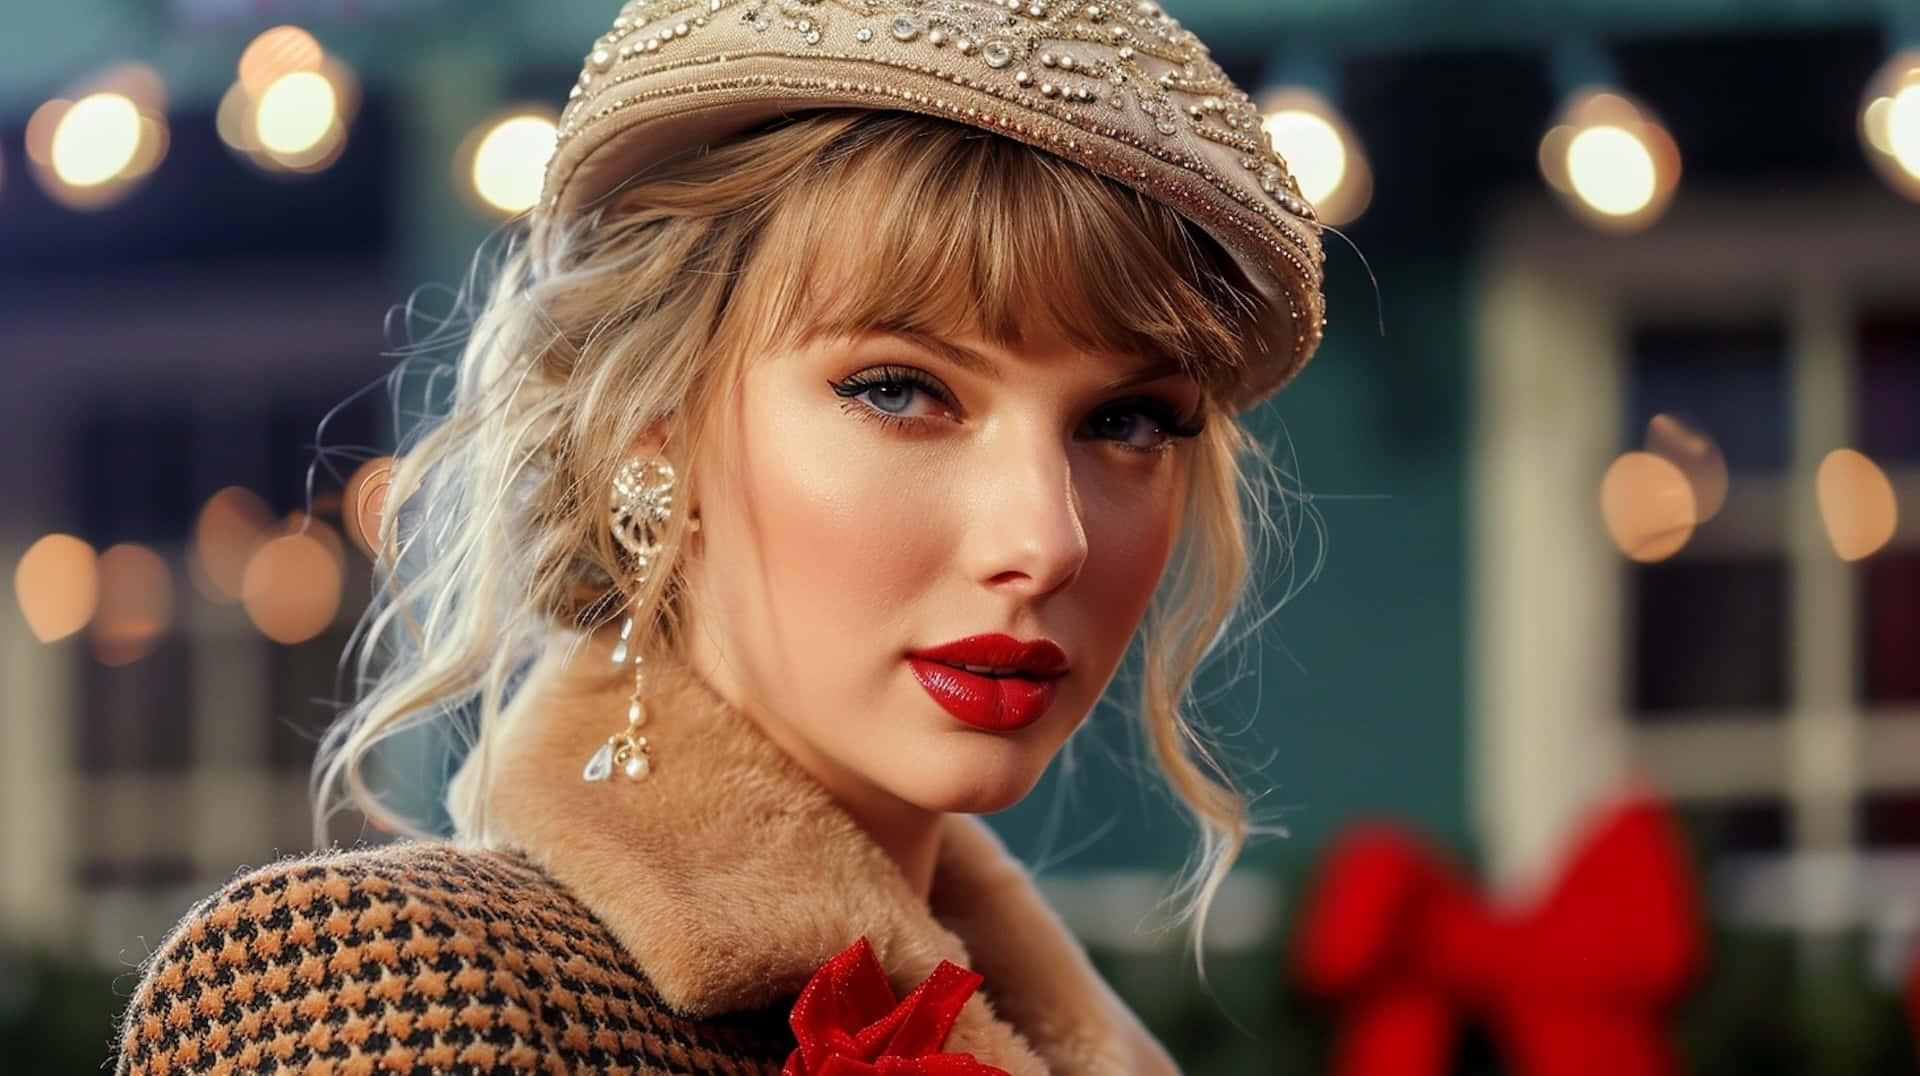 Holiday Glamourwith Taylor Swift Wallpaper